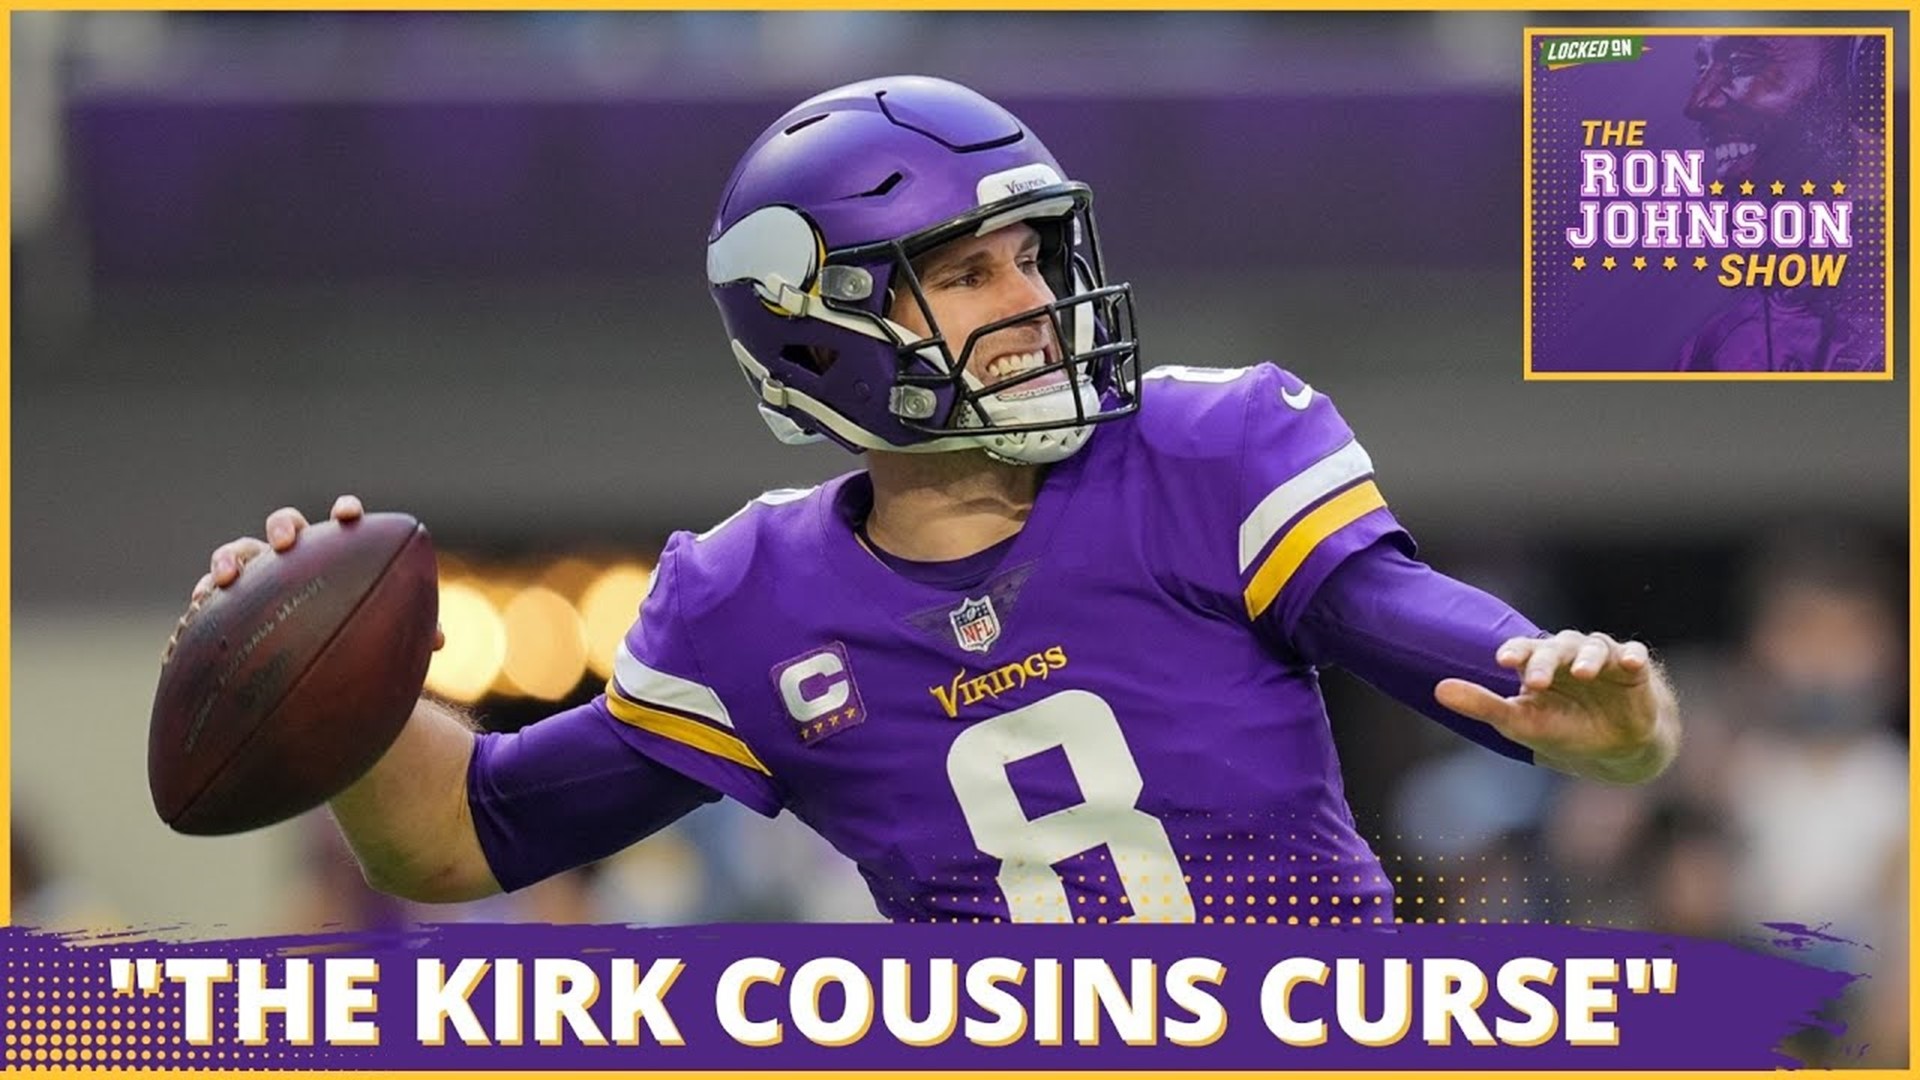 A Kirk Cousins CURSE You've Never Heard Of Before | The Ron Johnson Show